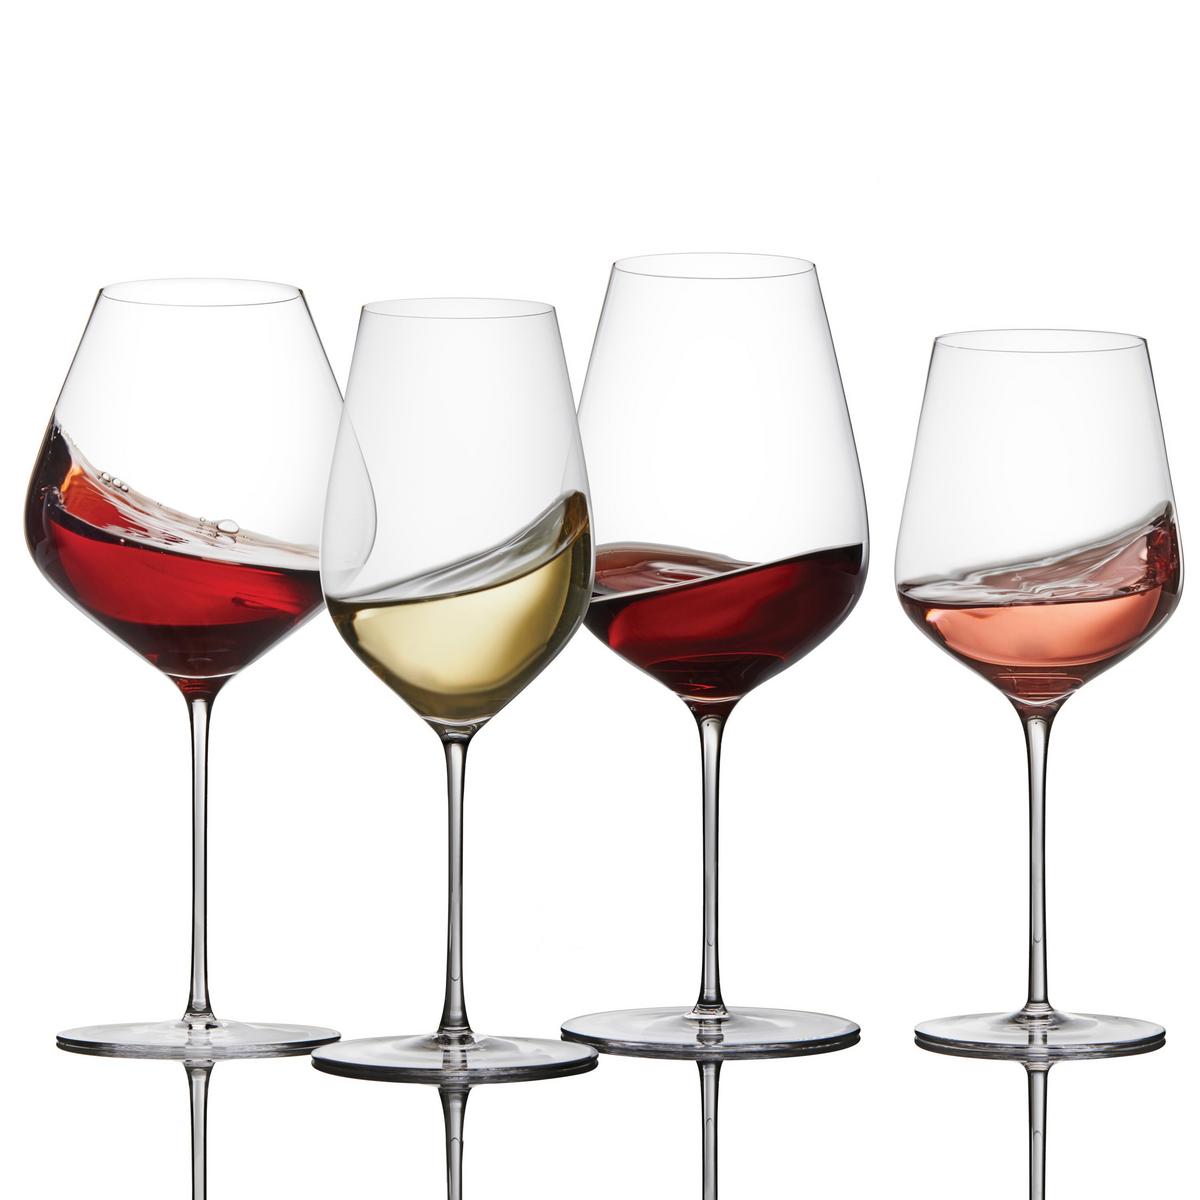 Invest in some fine wine glasses and taste the difference this year